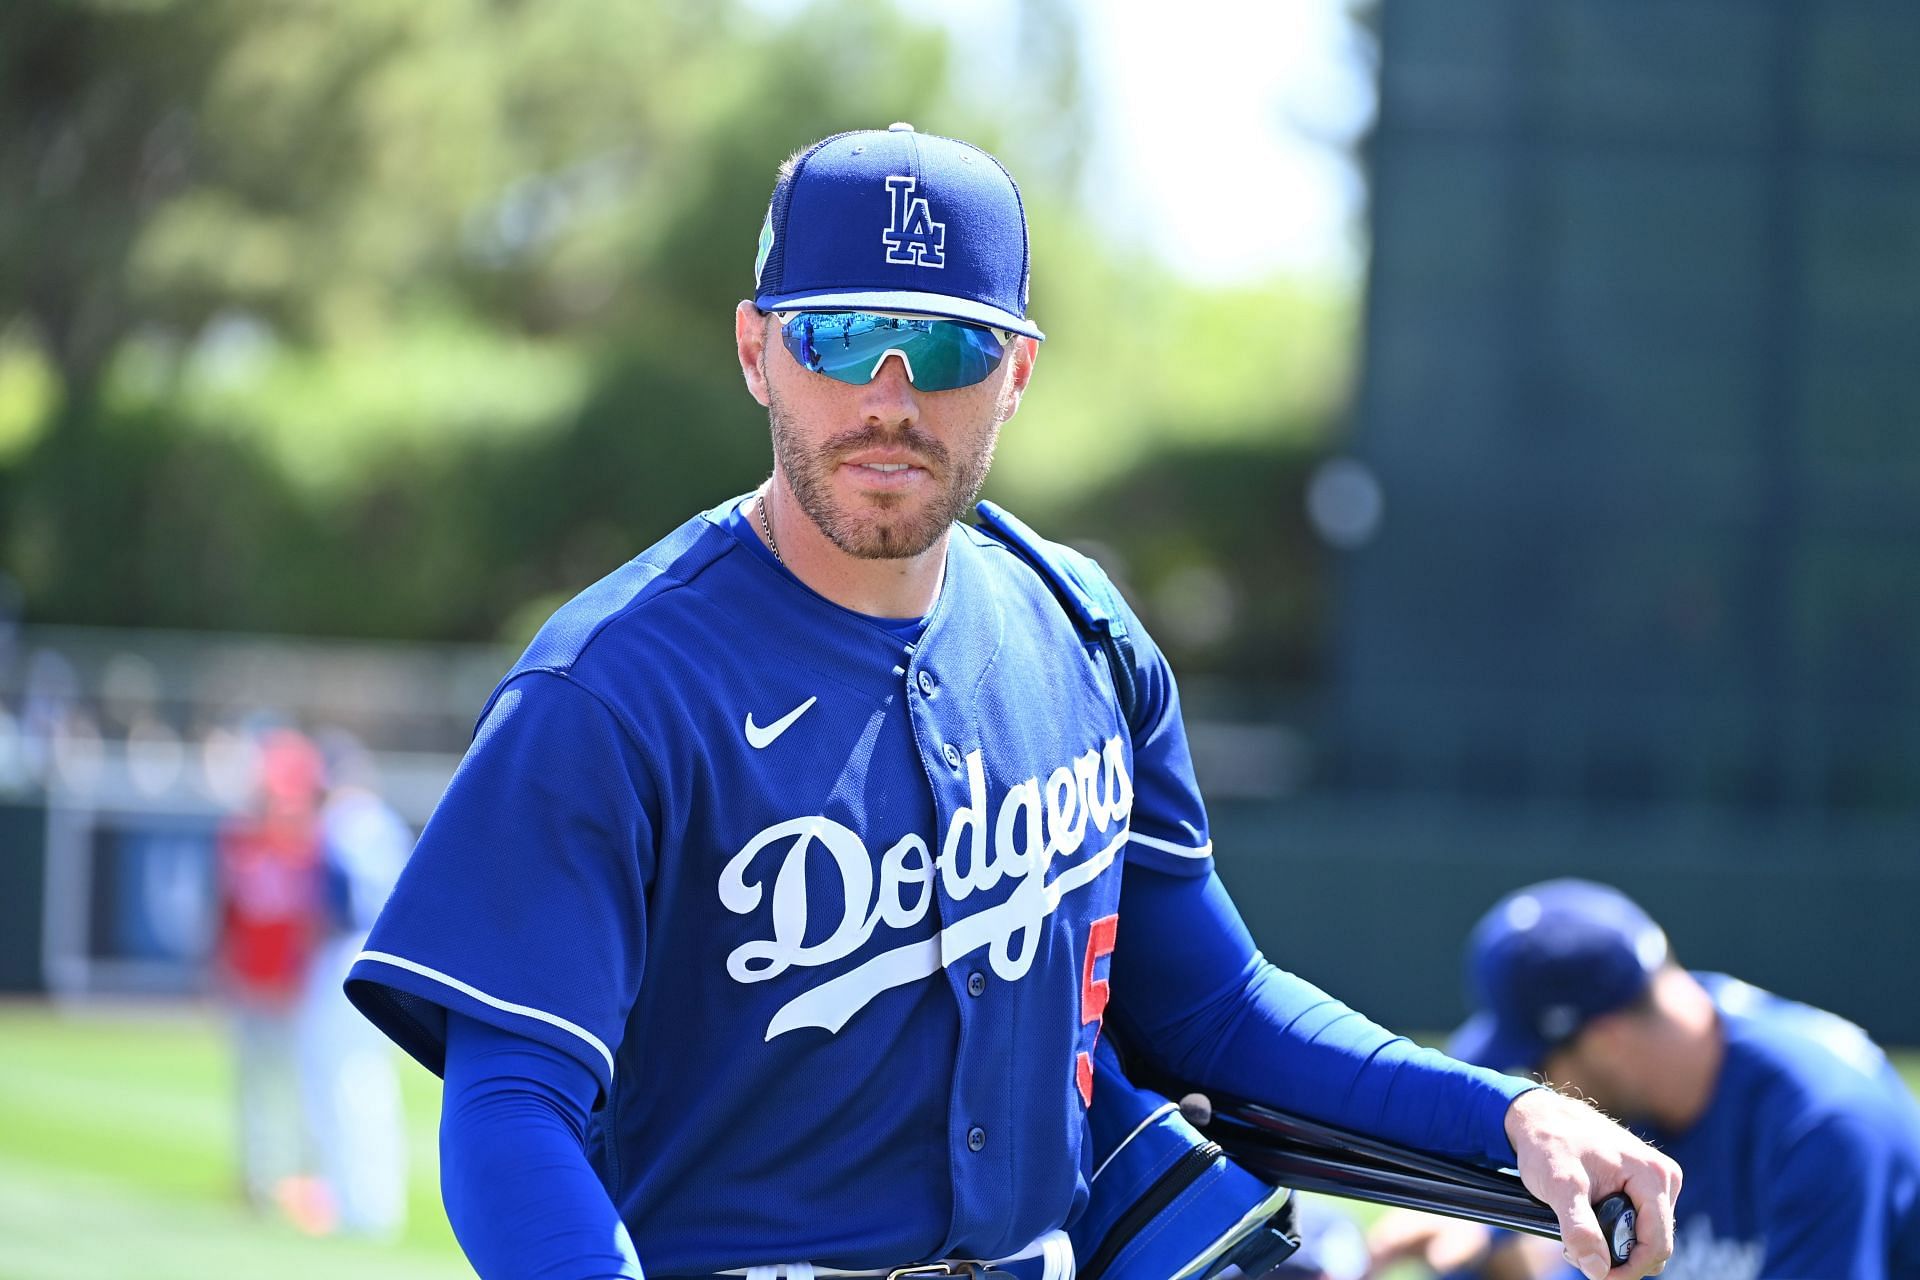 Freeman with his new team - Los Angeles Dodgers